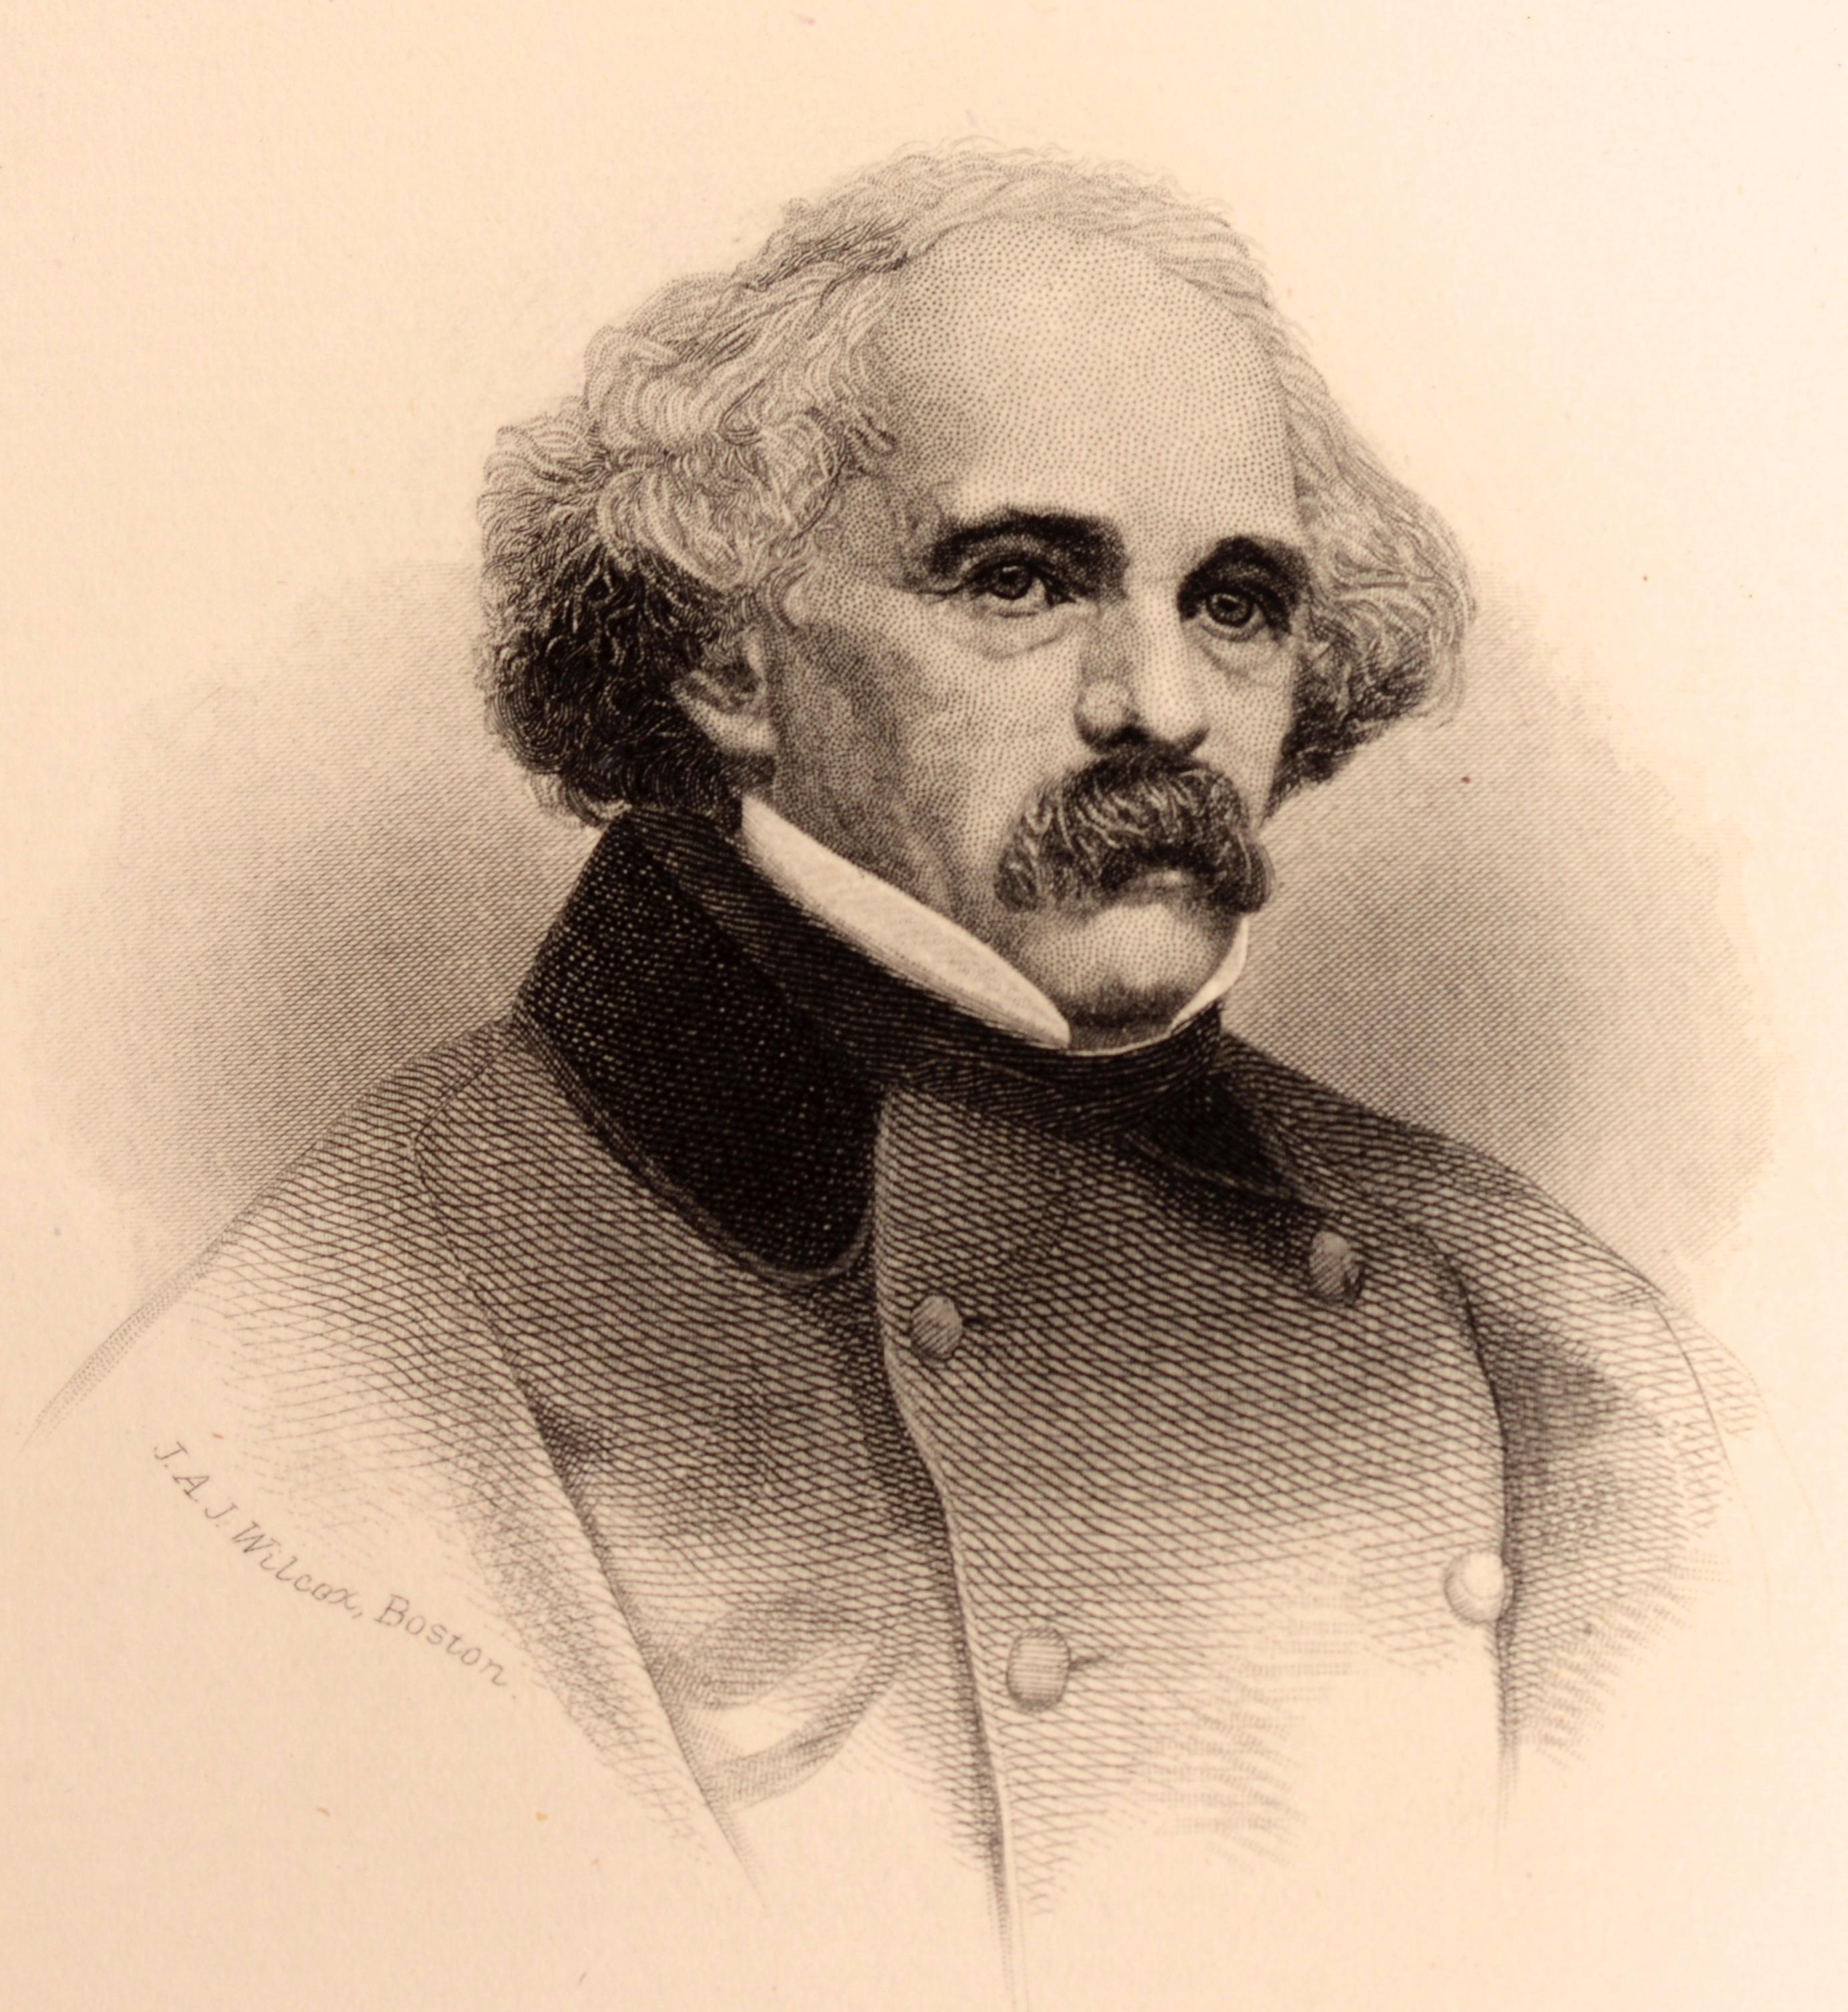 The Complete Works of Nathaniel Hawthorne (6 of 13 Volumes An Incomplete Set), by Nathaniel Hawthorne with Introductory Notes By George Parsons Lathrop. Published by Houghton Mifflin Company, Boston, 1888, Riverside Edition. Original 3/4 scarlet